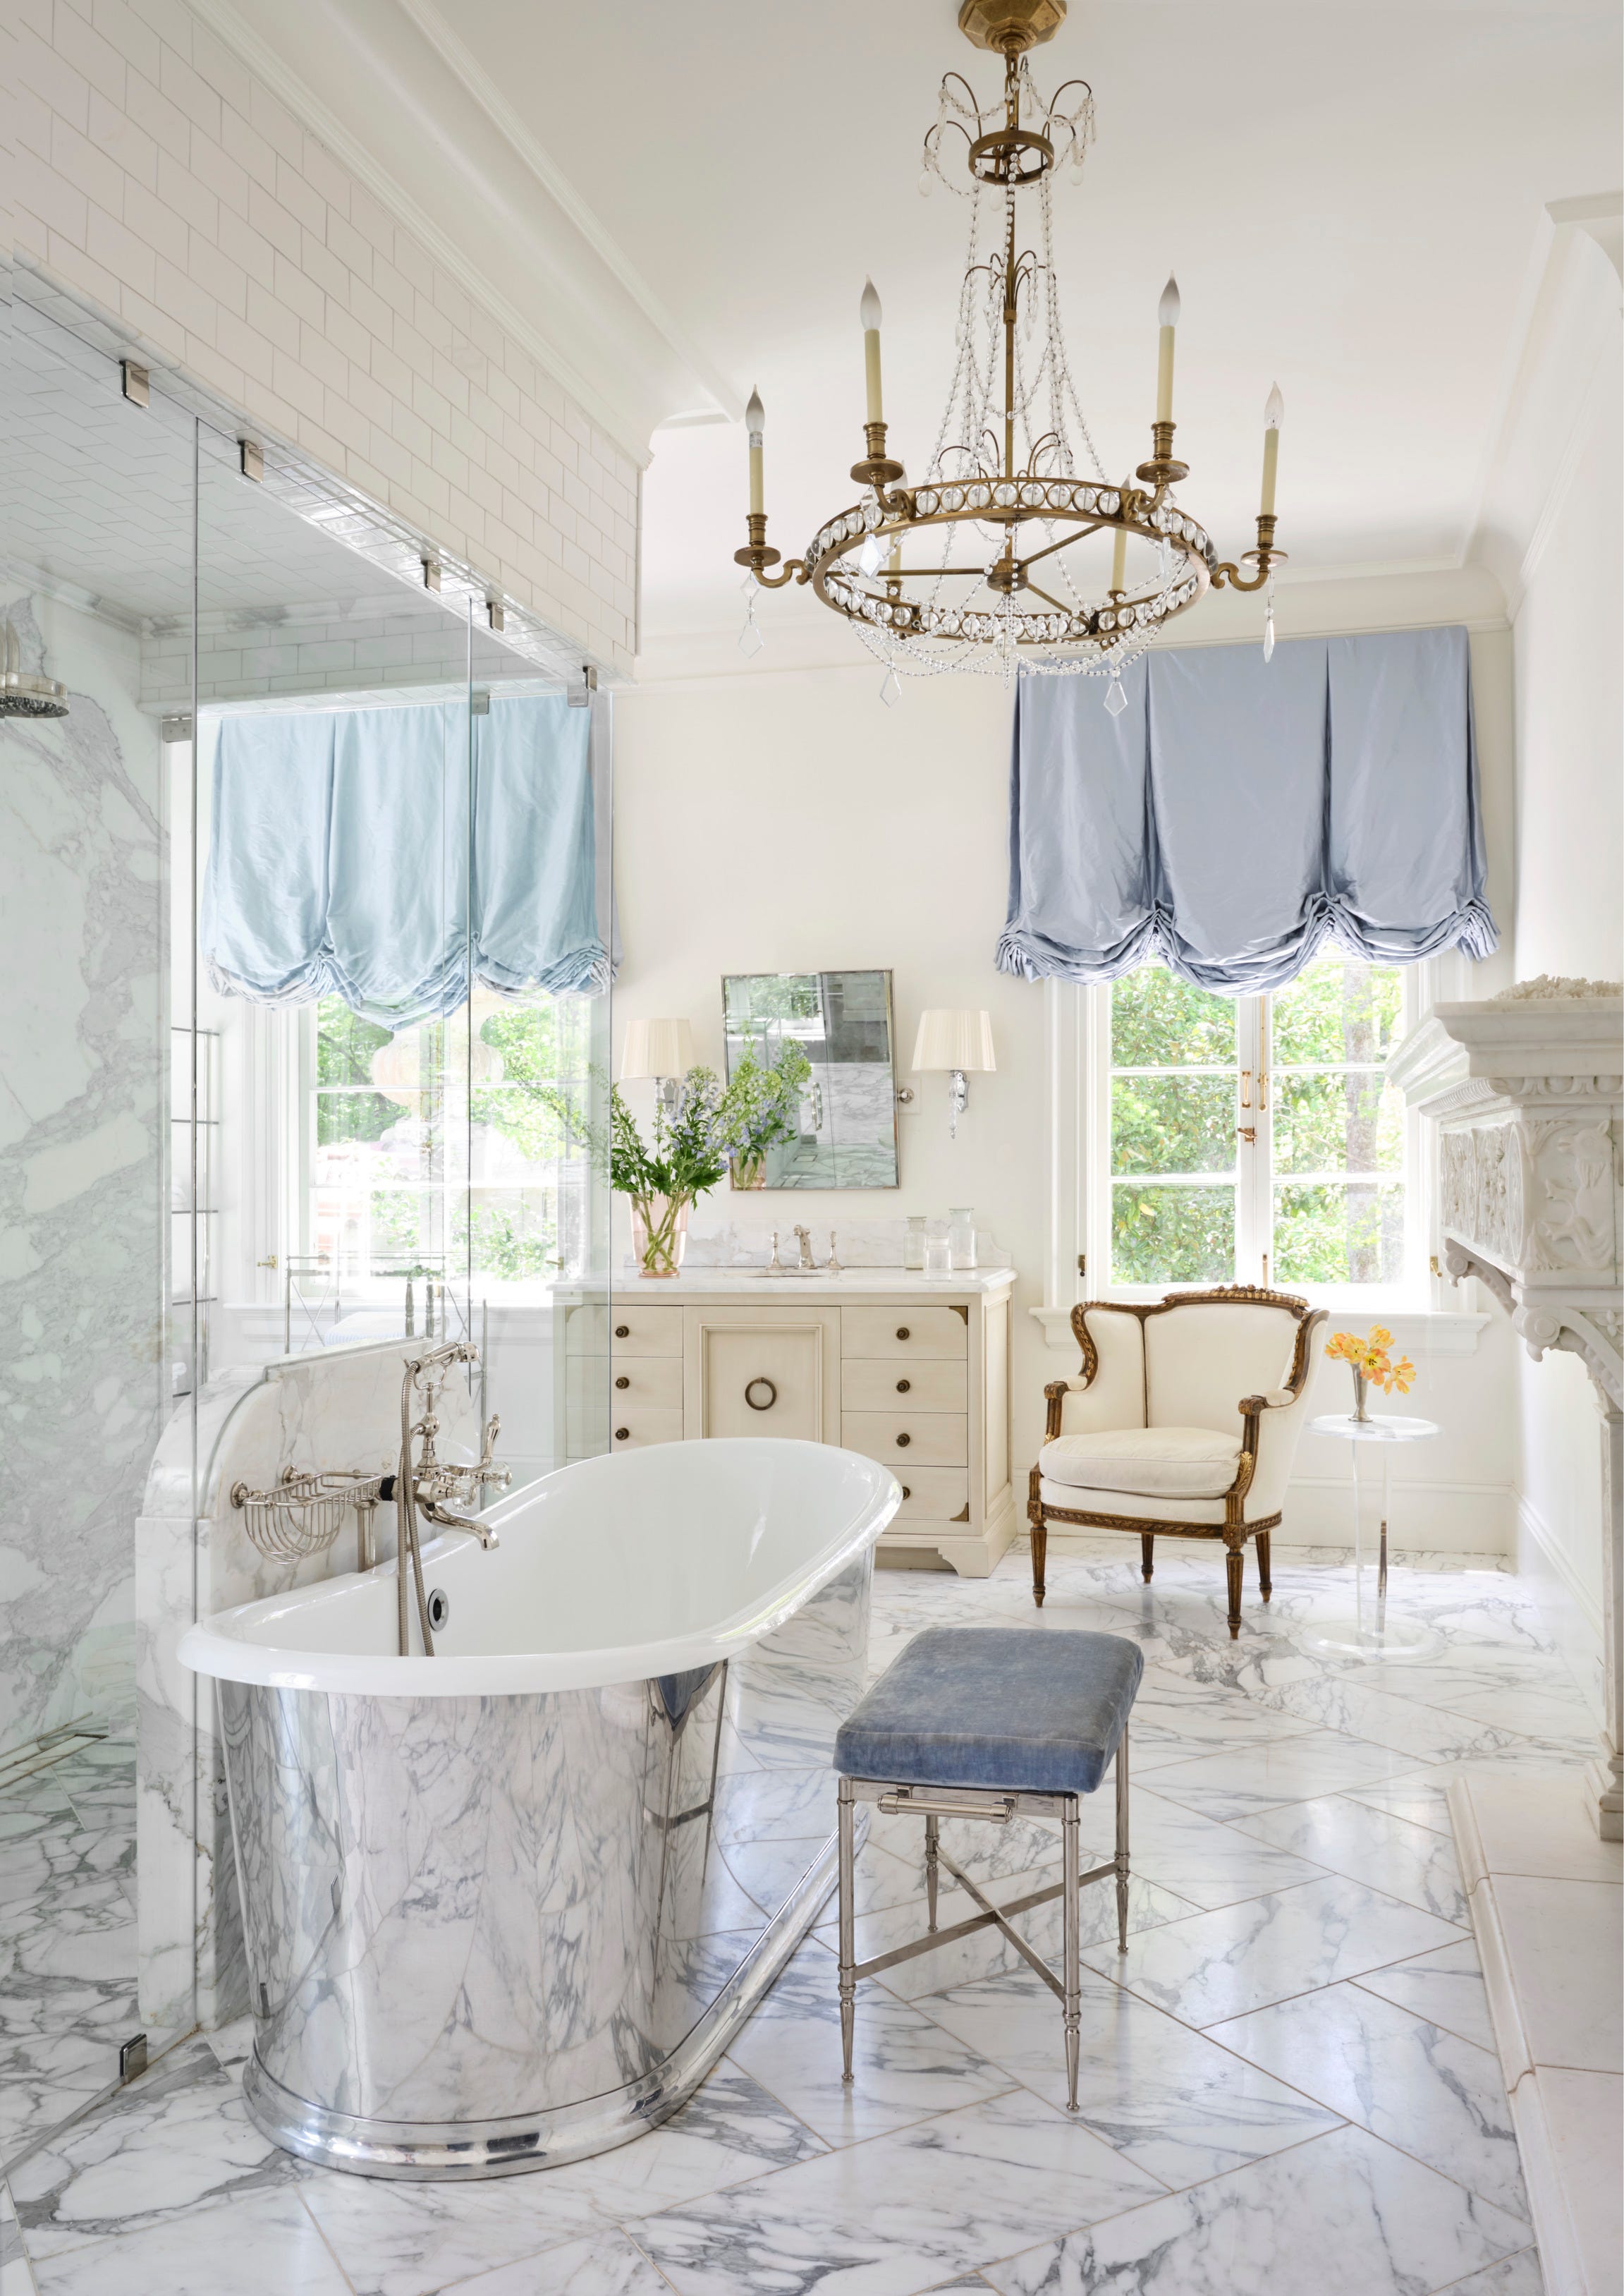 3 Ways to Make Your Bathroom Look More Expensive, According to Designers